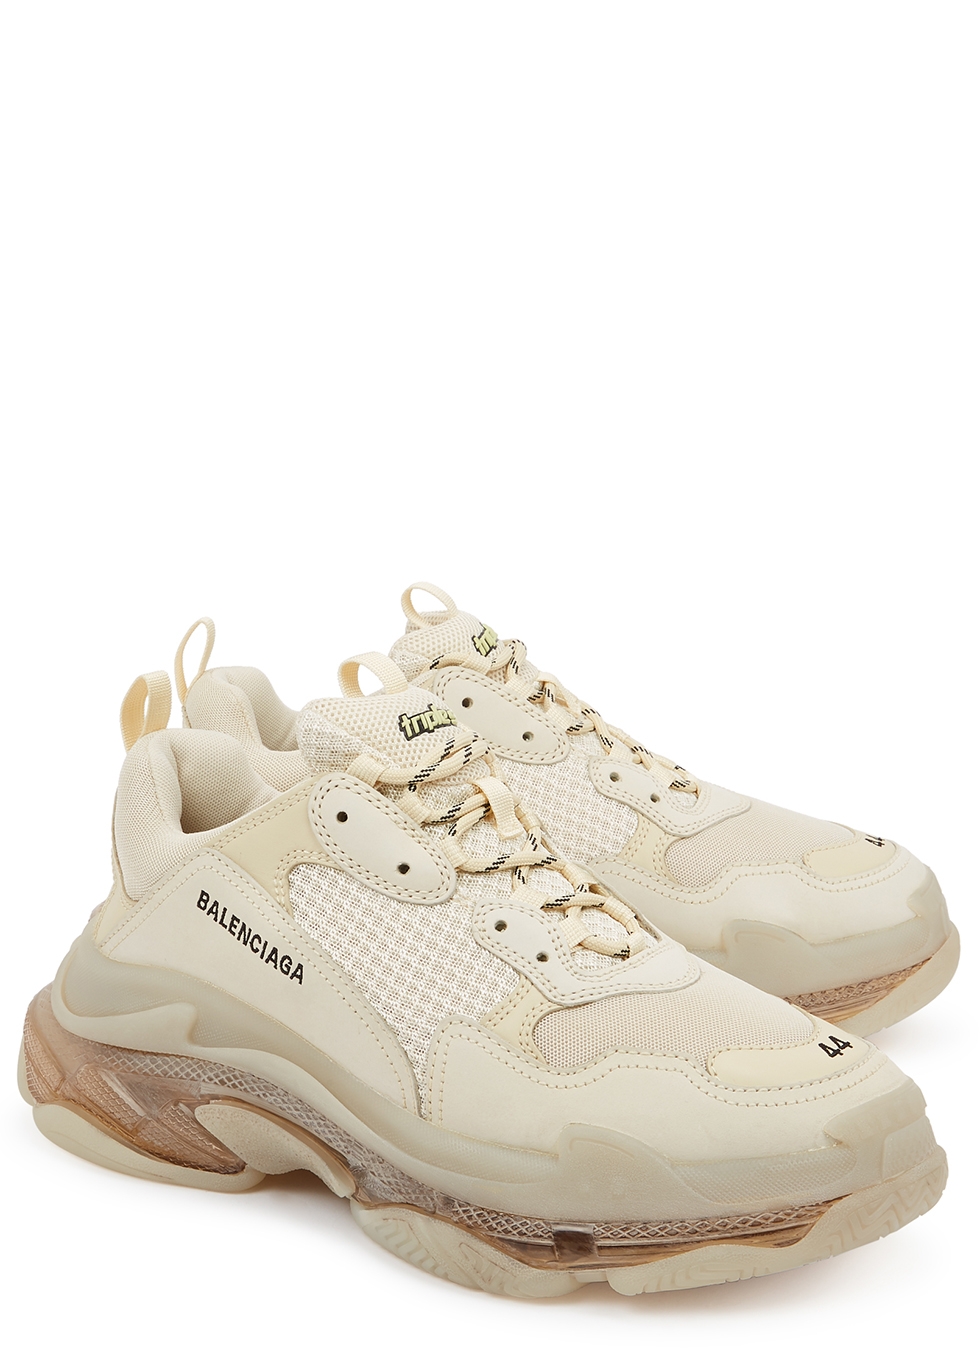 New Releases Where to Buy Online Balenciaga Triple S